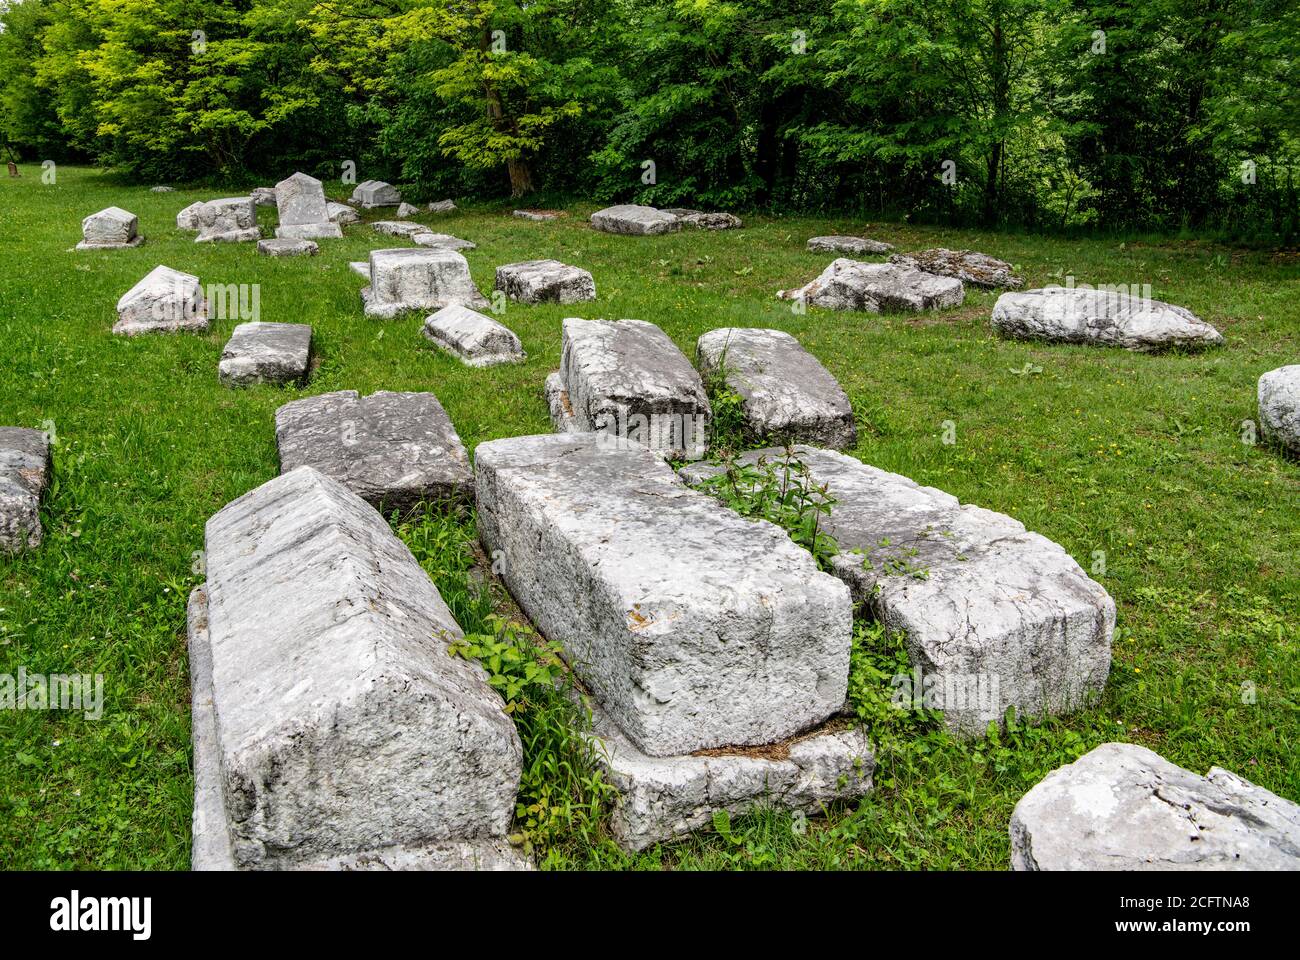 Medieval necropolis from 14th century called Mramorje. Located in Perucac national park Tara mountain, Serbia. Tombstones of different shapes. Stock Photo